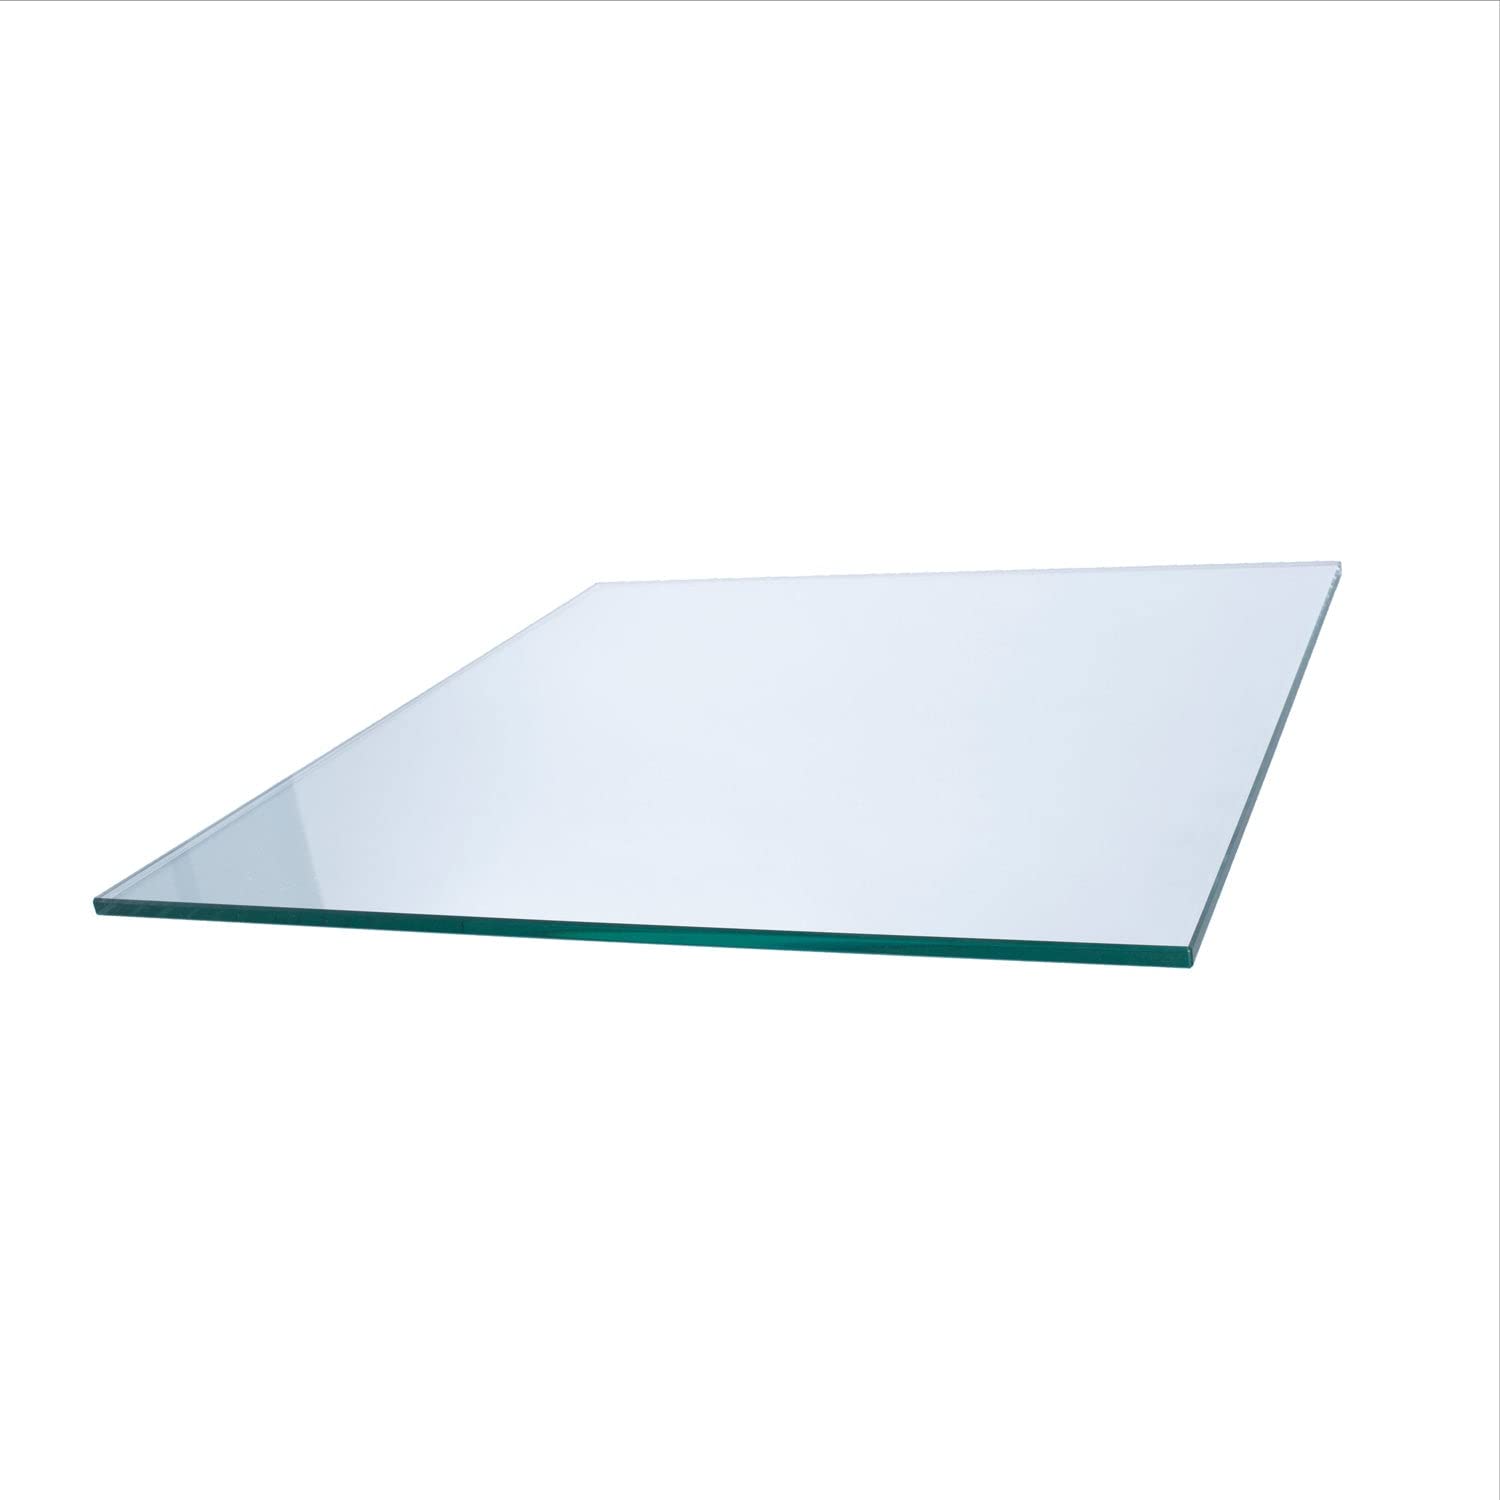 24" Square Clear Tempered Glass Table Top 3/8" Thick Pencil Edge